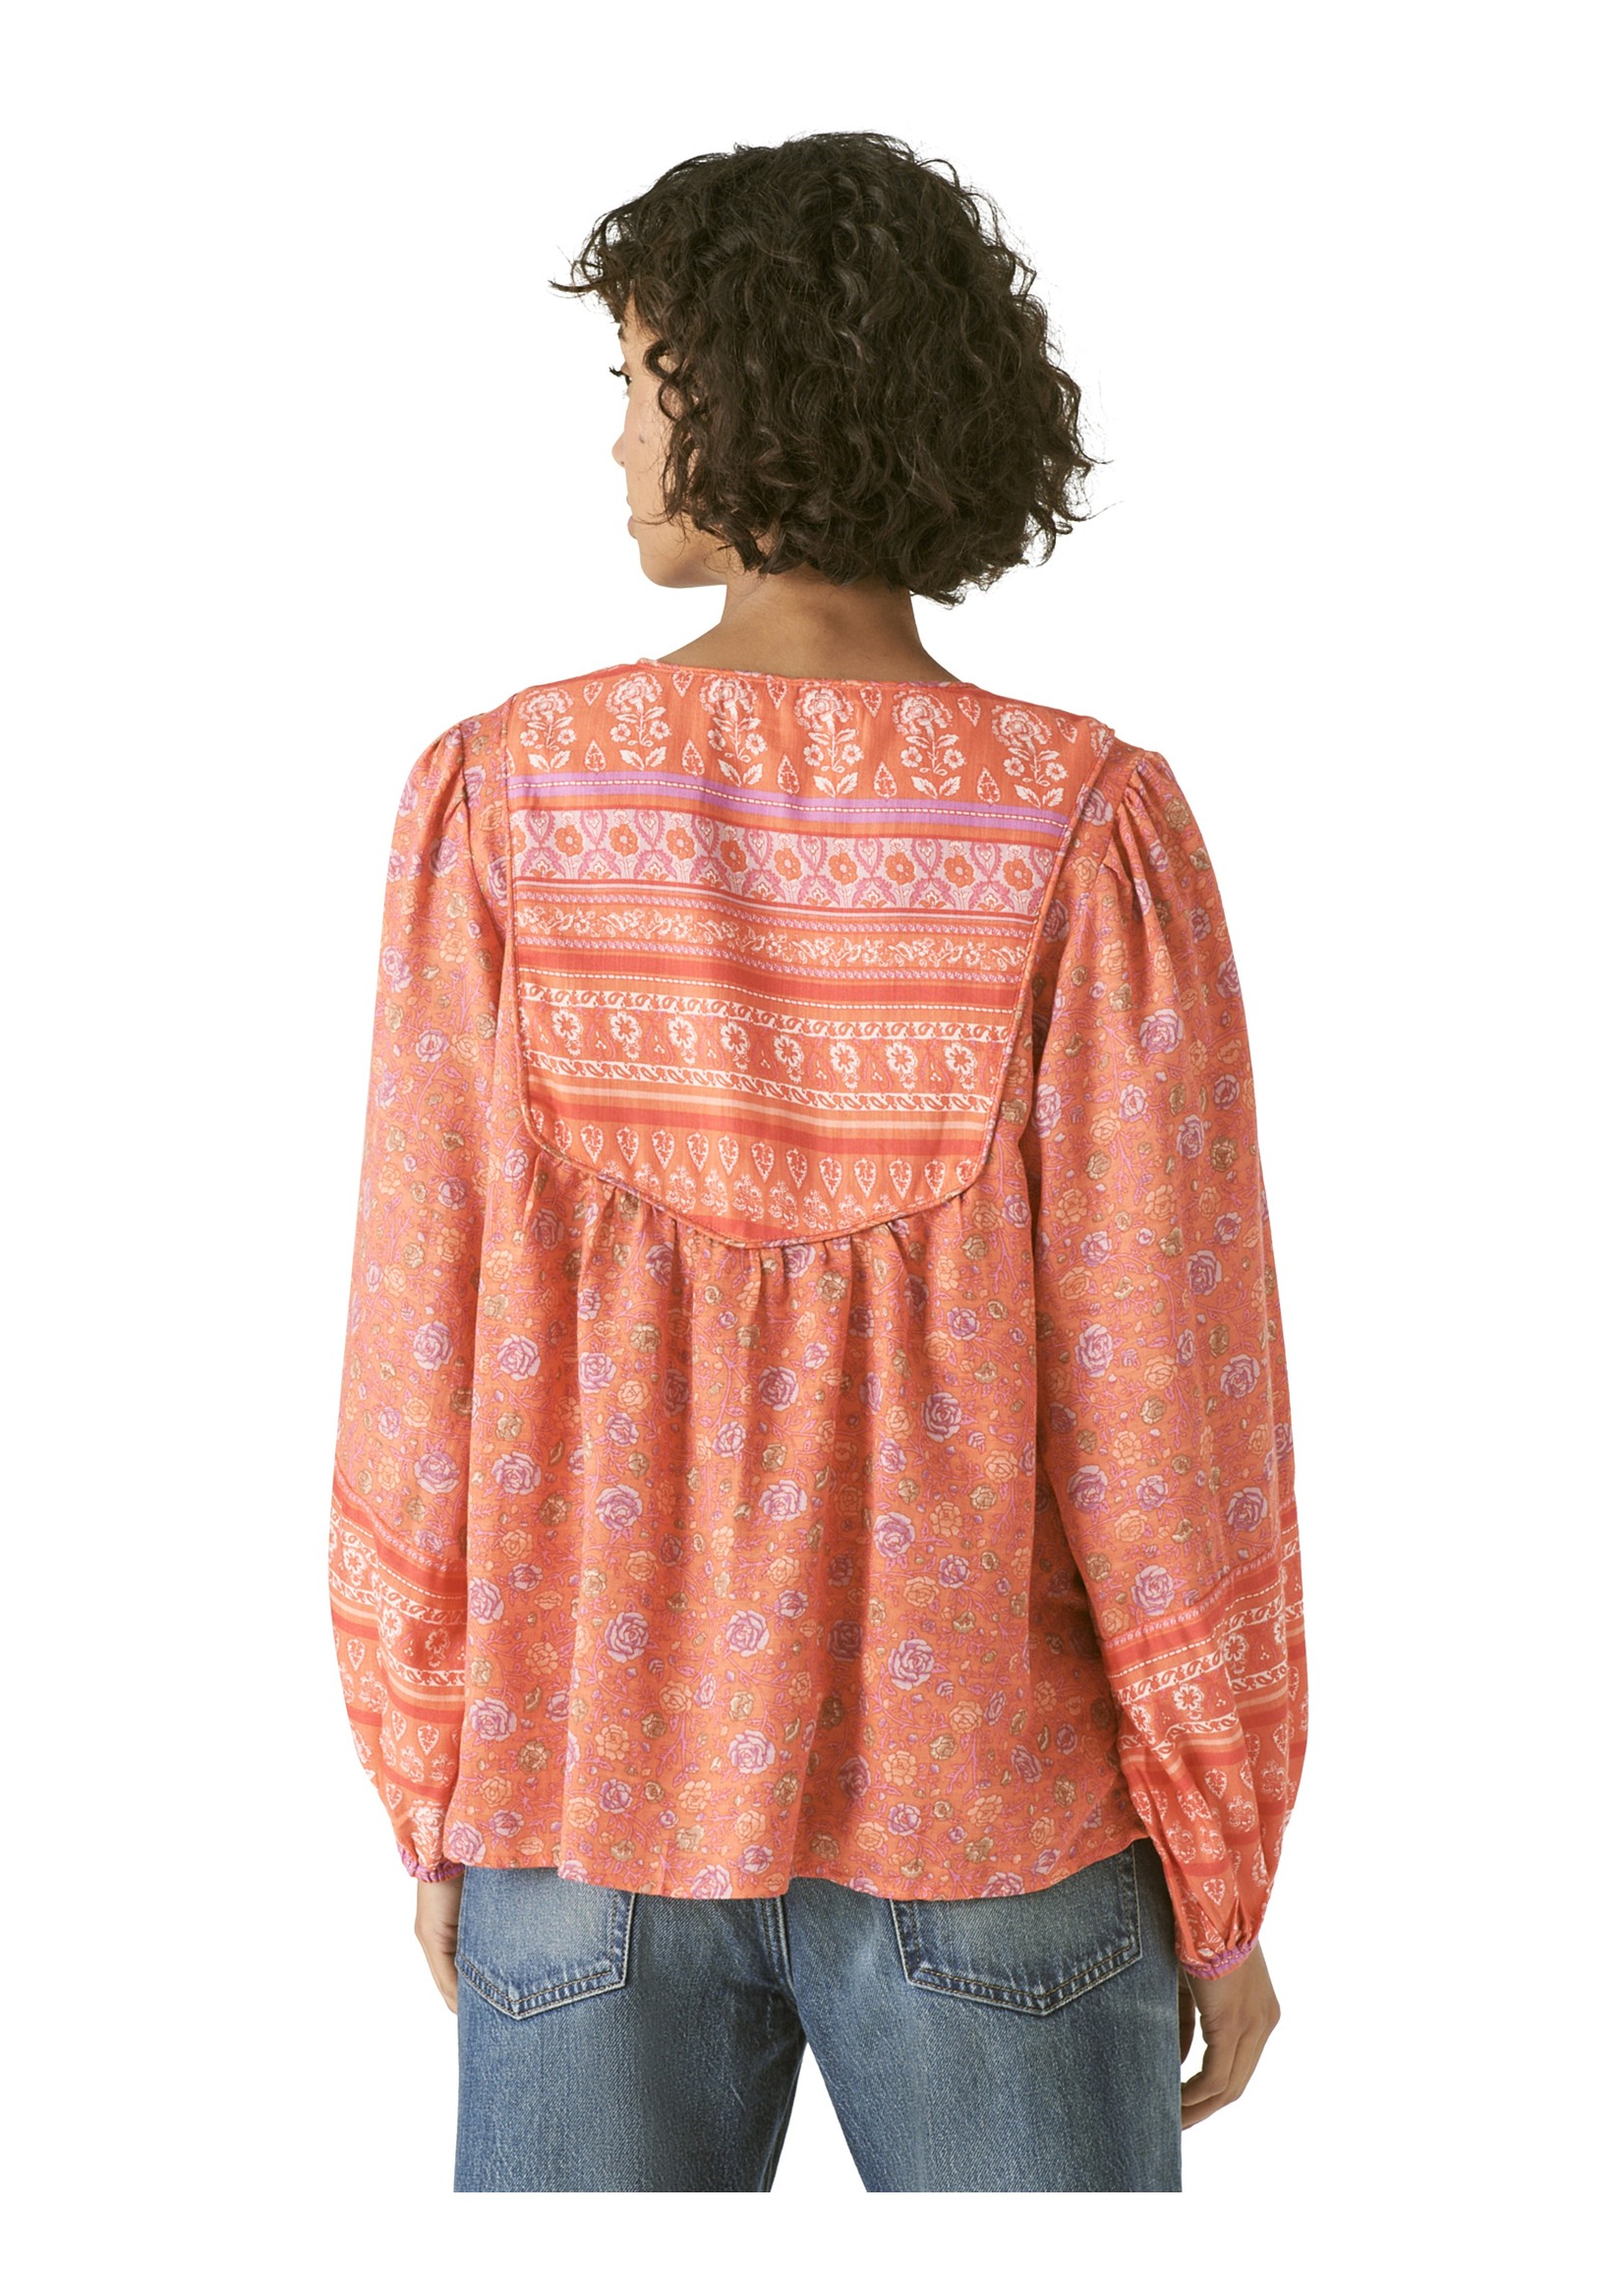 Lace Up Border Print Peasant Top Red Multi